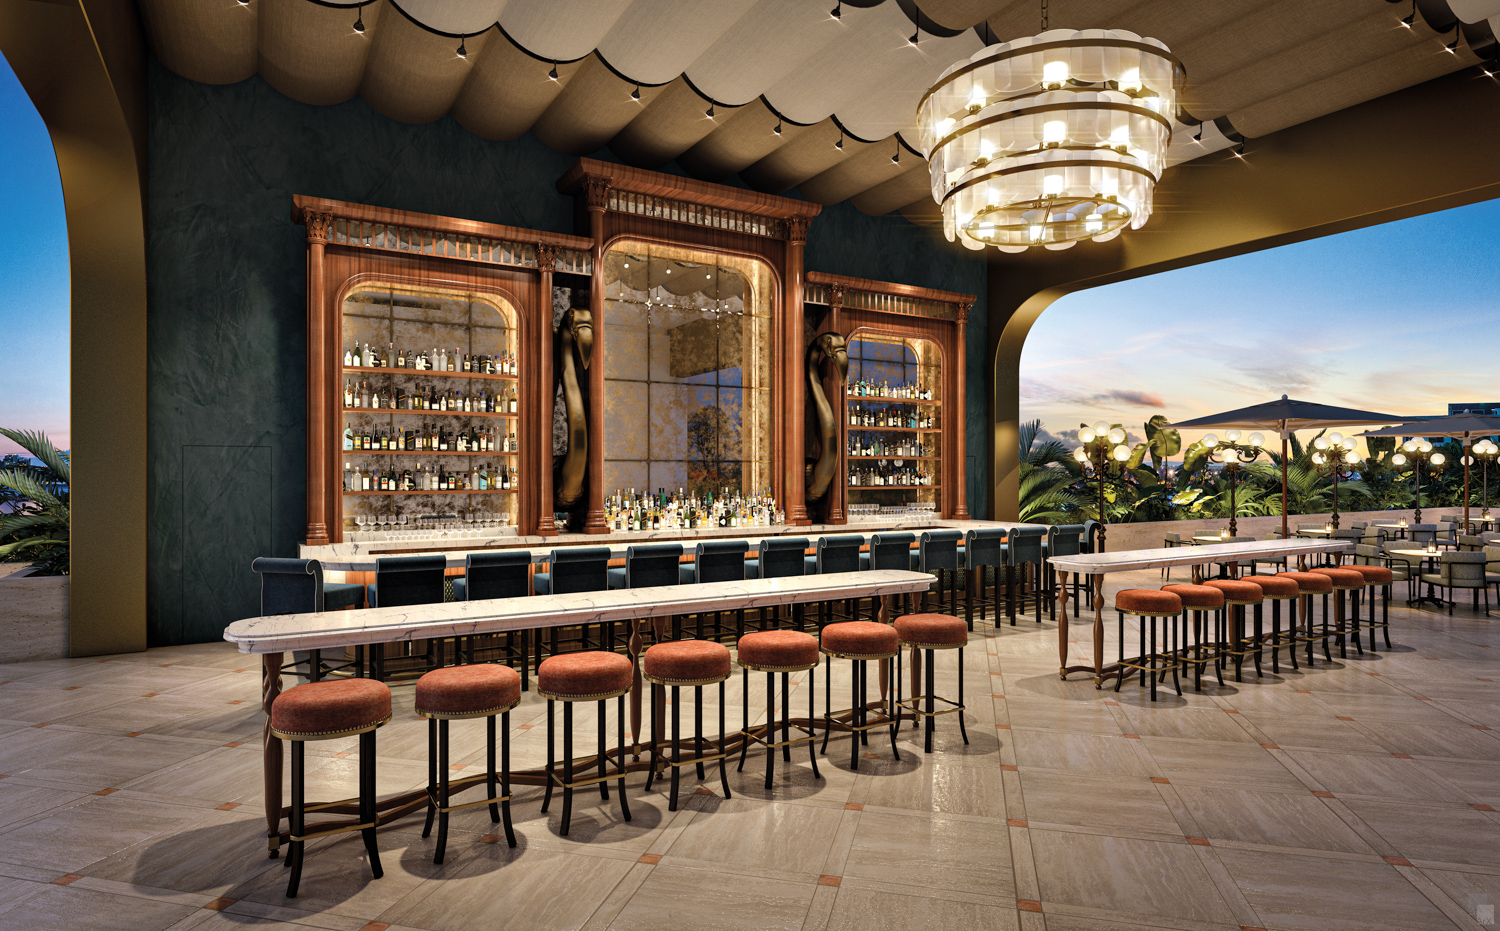 Rendering of interior-exterior speakeasy-style bar leading to outdoor restaurant seating